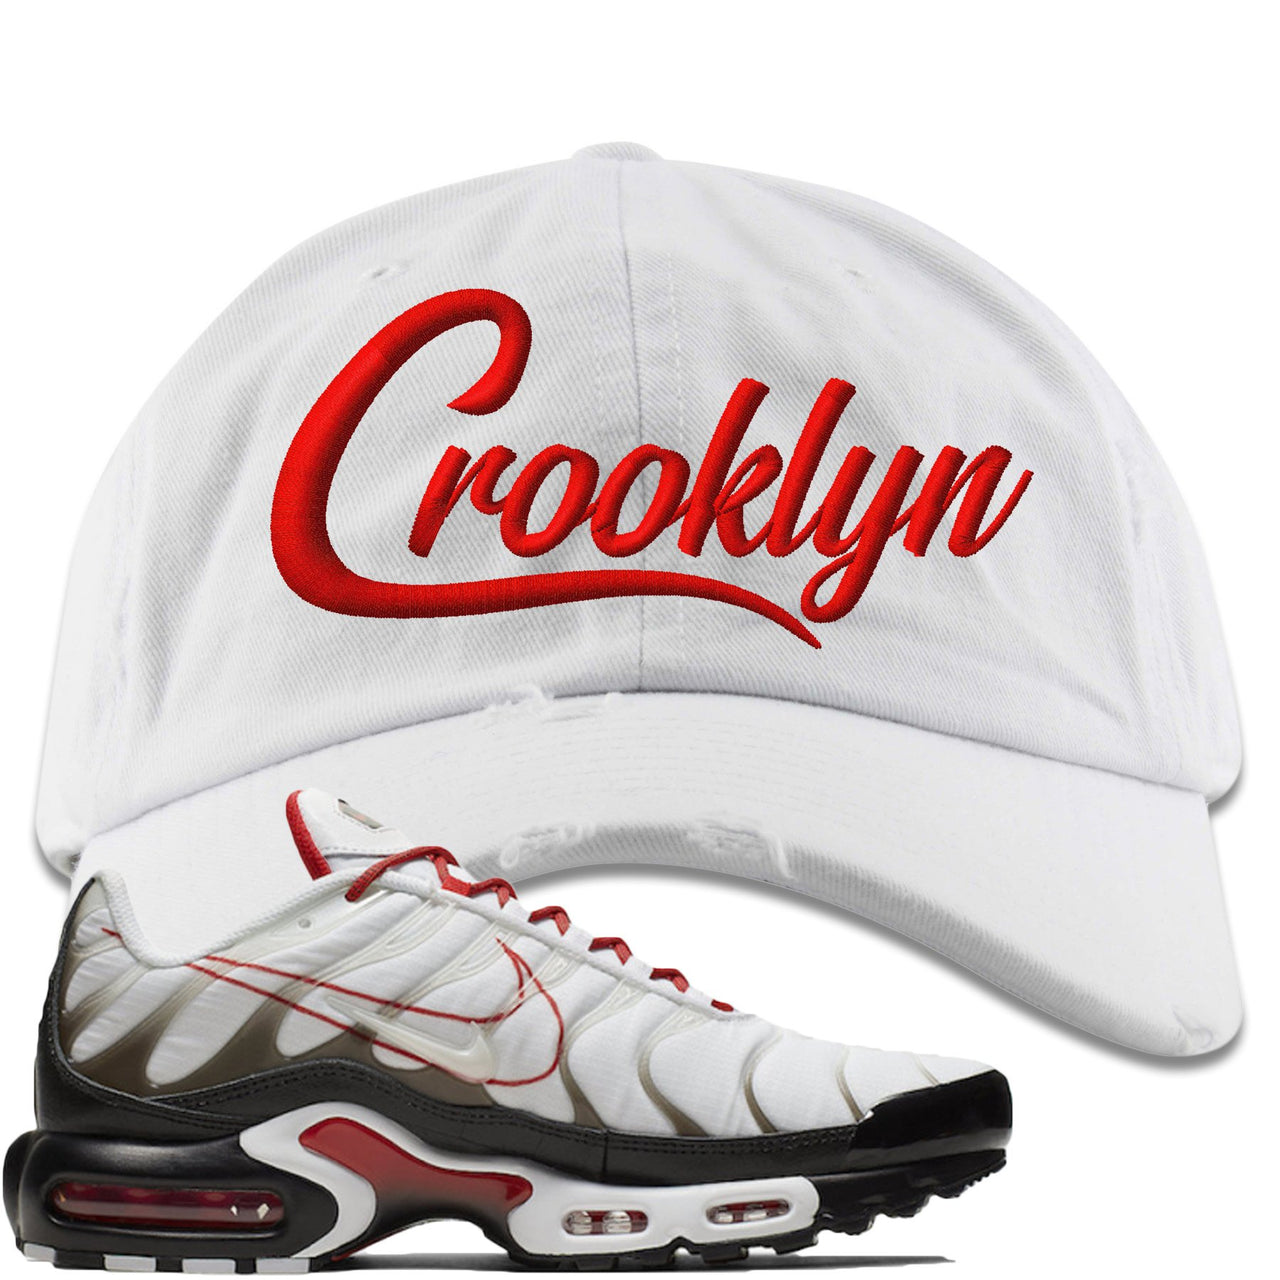 White University Red Pluses Distressed Dad Hat | Crooklyn, White